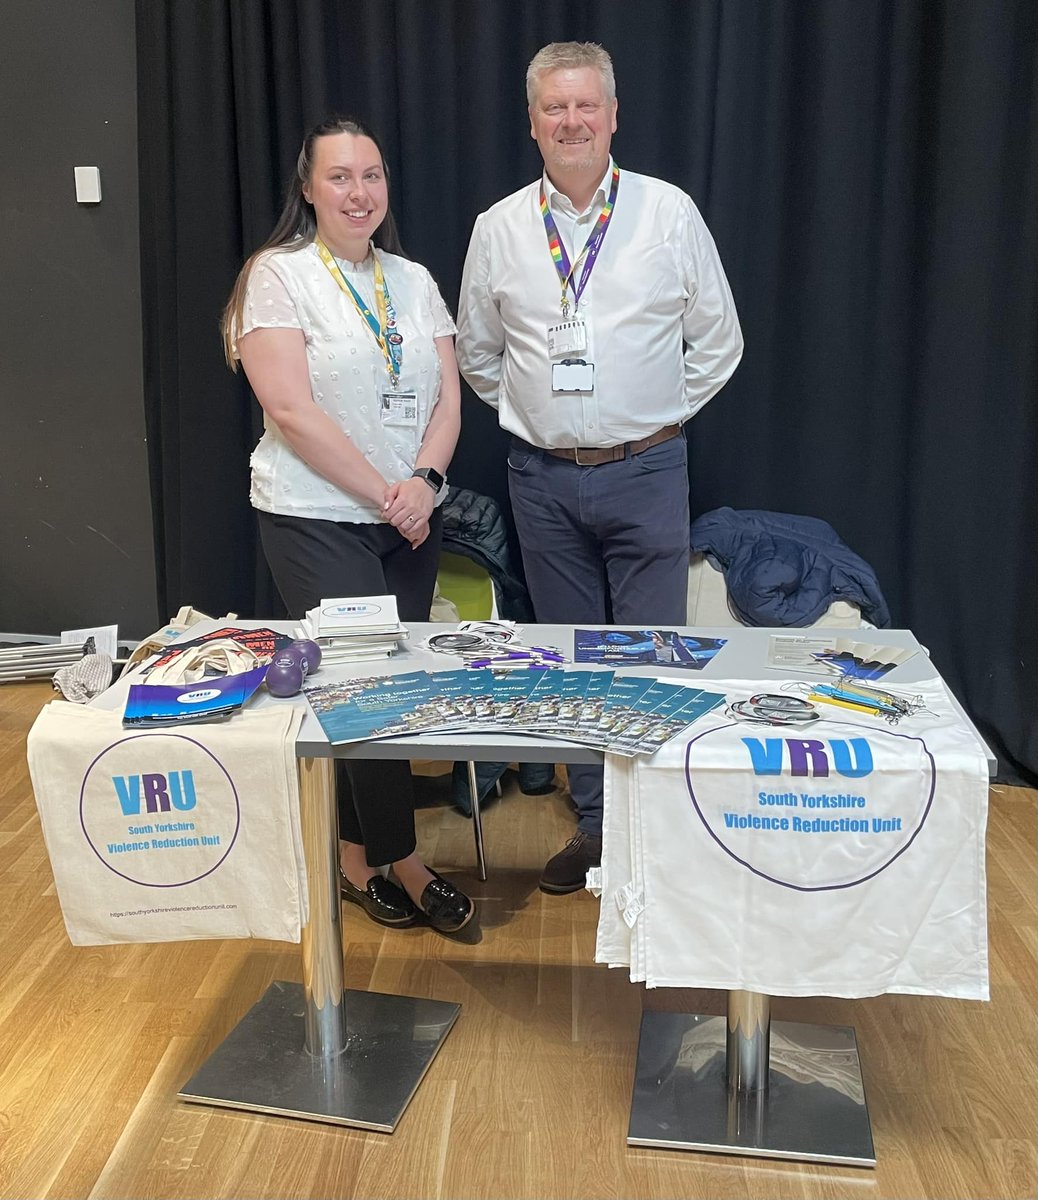 ICYMI, the VRU and the Office of @SYPCC attended @barnsleycollege’s Wellbeing Event this week. It was fantastic to meet so many staff and students, and great to chat to them about the work we do across South Yorkshire.